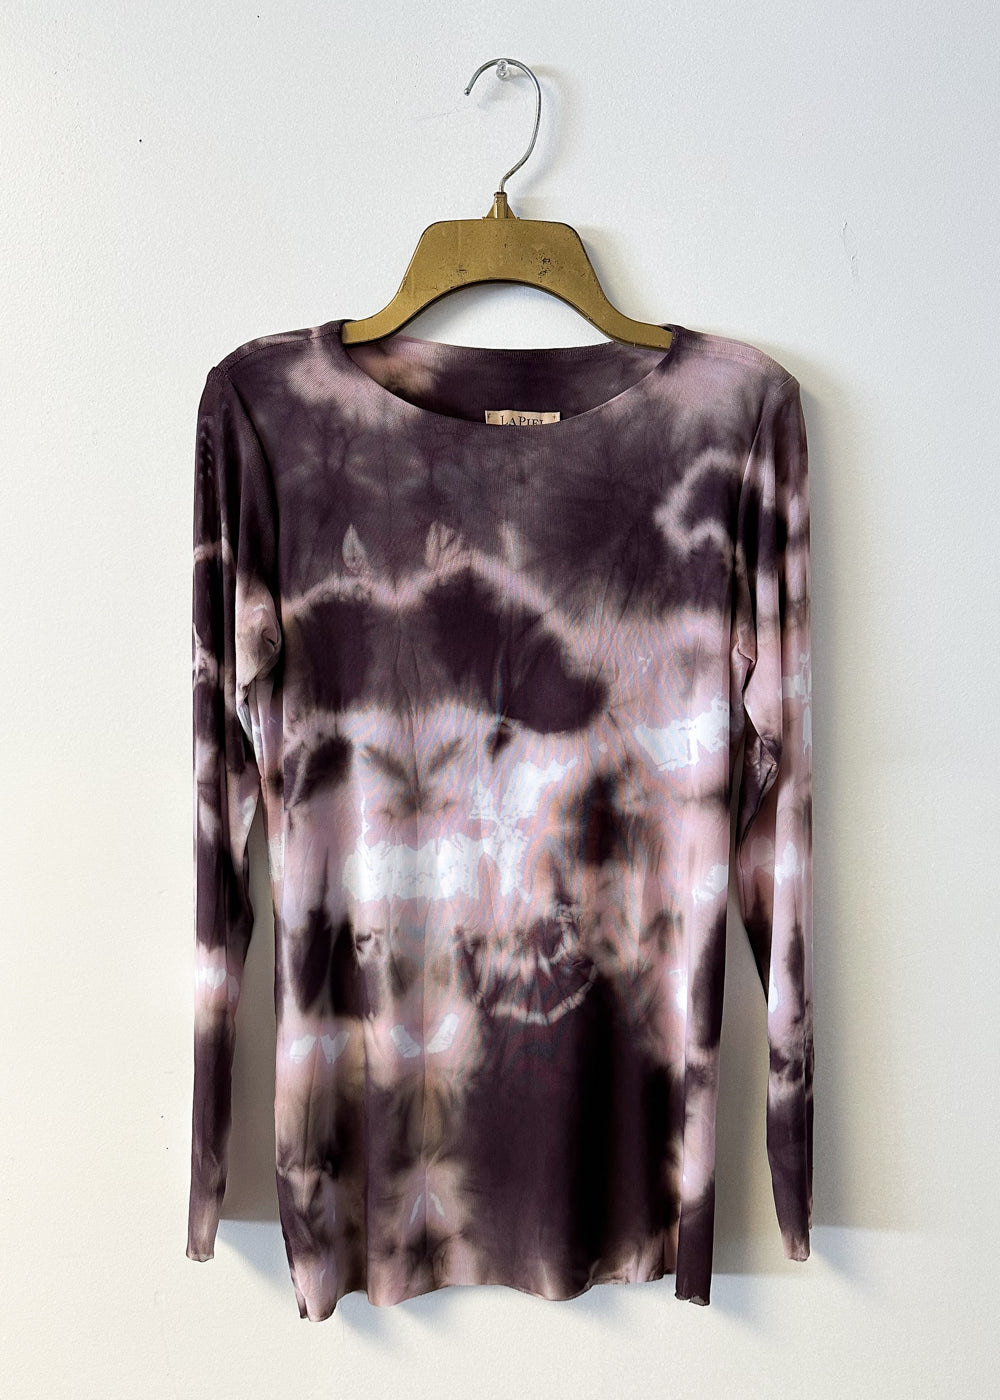 Web Exclusive Print - Florence Double Sheer Top